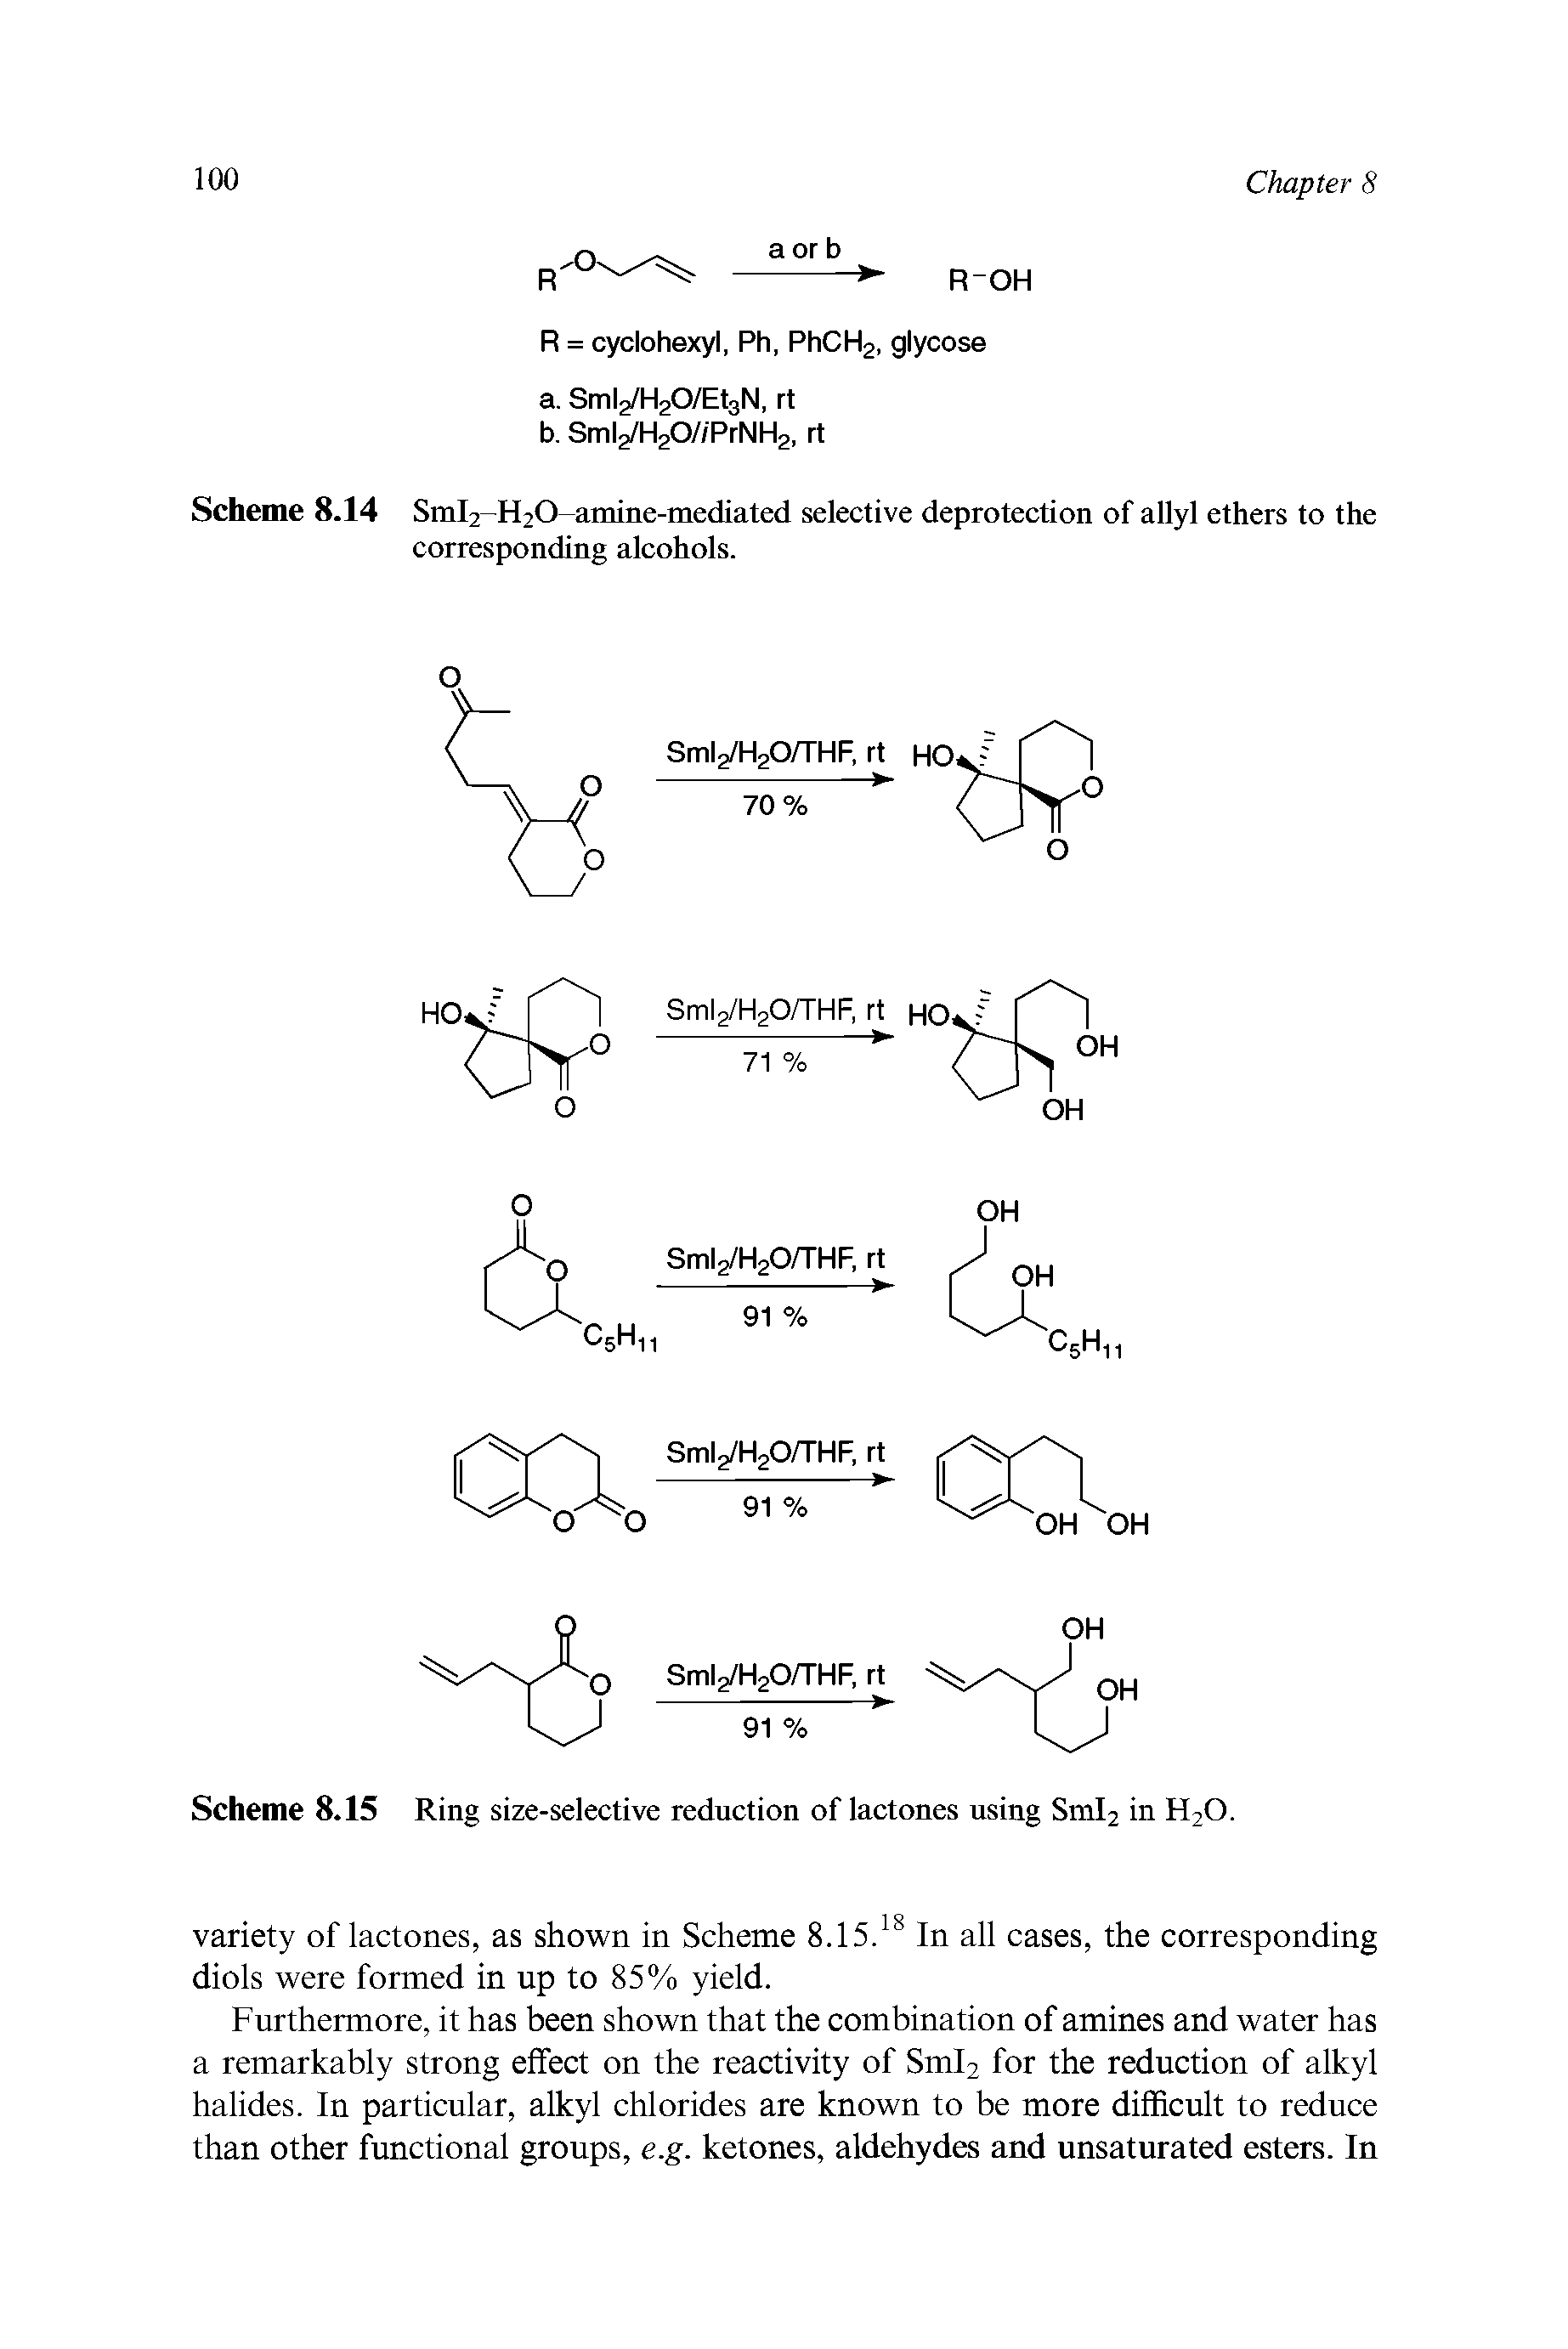 Scheme 8.15 Ring size-selective reduction of lactones using Sml2 in H20.